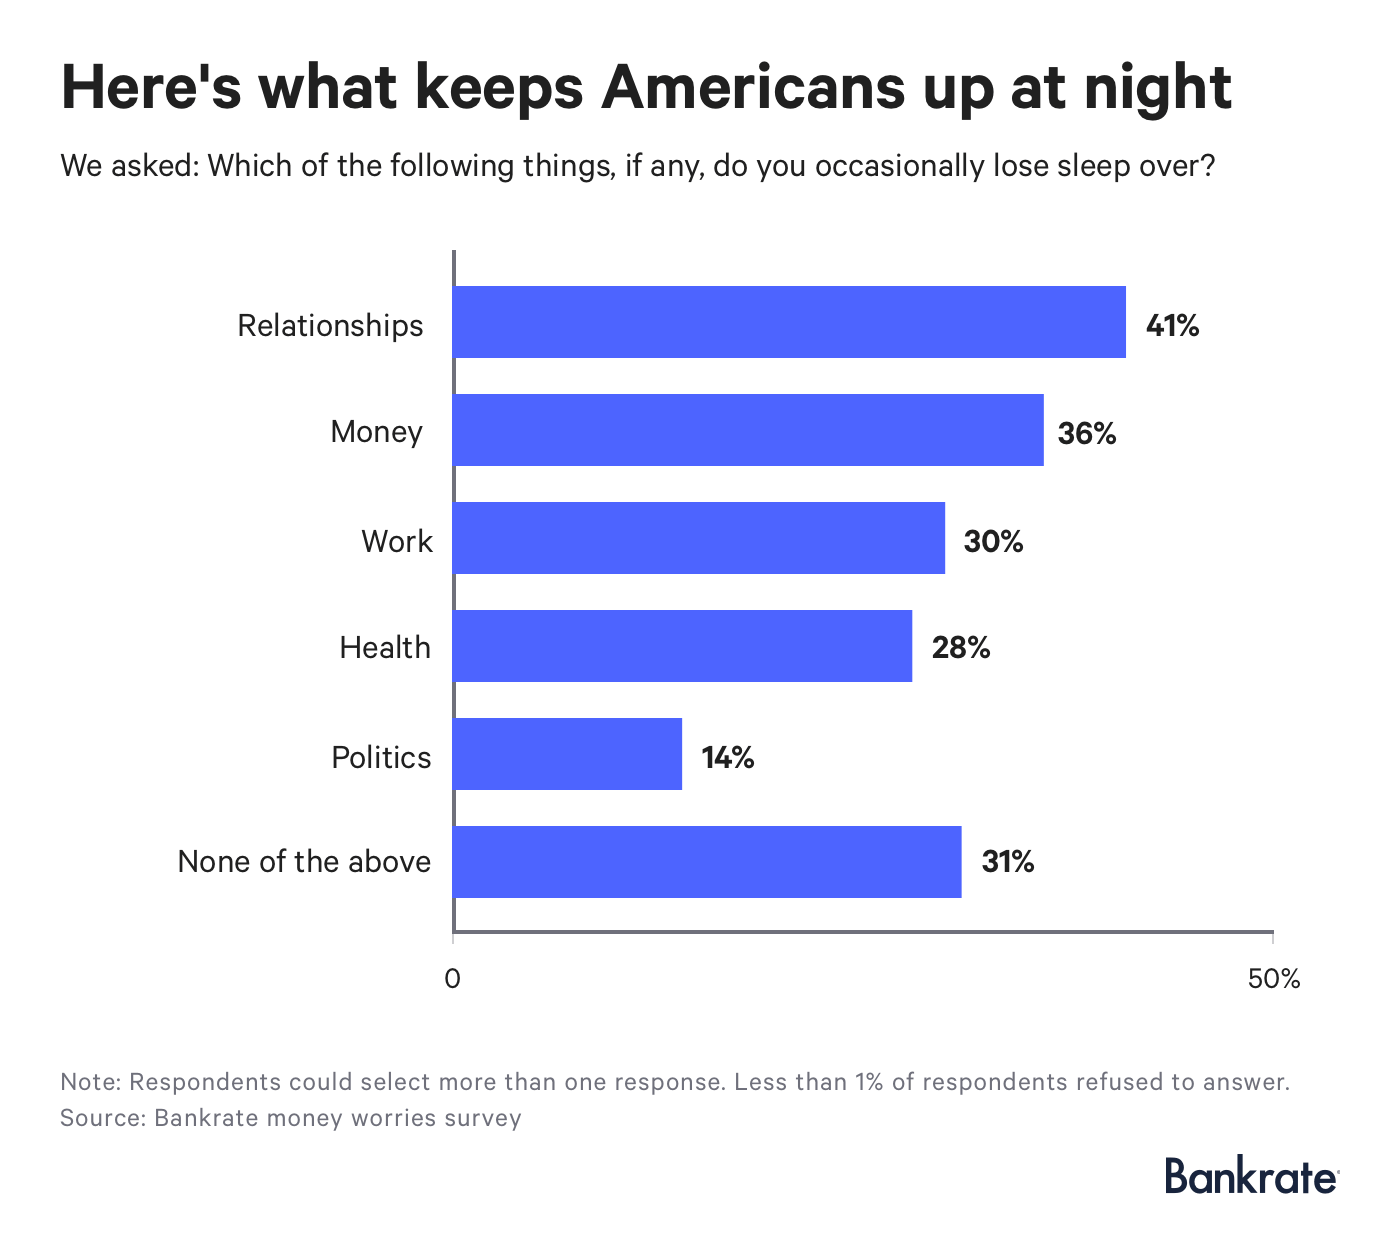 Relationships and money are the top things Americans occasionally lose sleep over